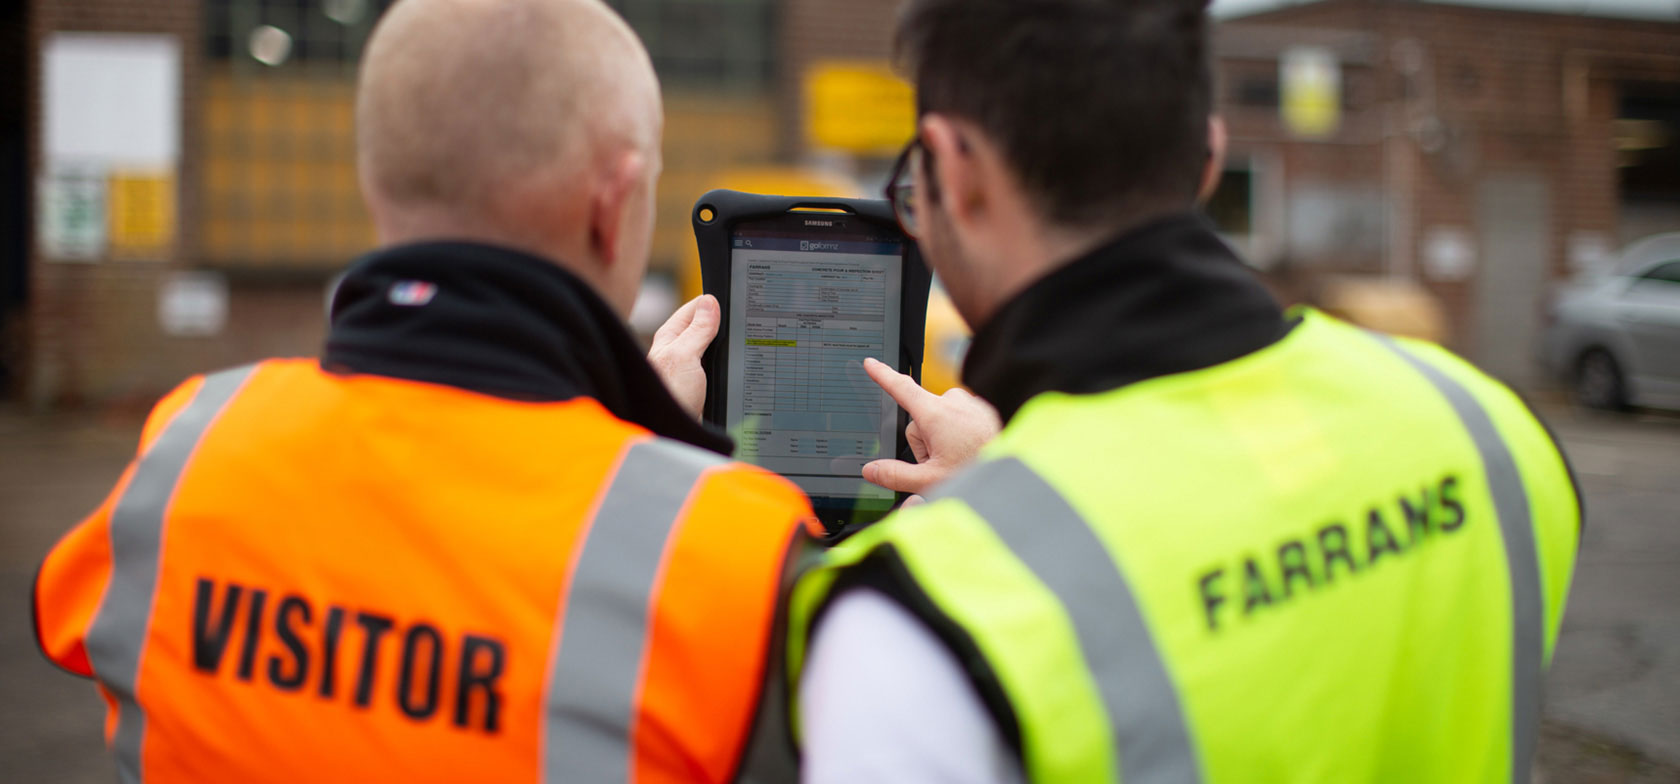 Two Farrans Construction engineers fill out a mobile form in the GoFormz app on a tablet, wearing yellow and orange safety vests